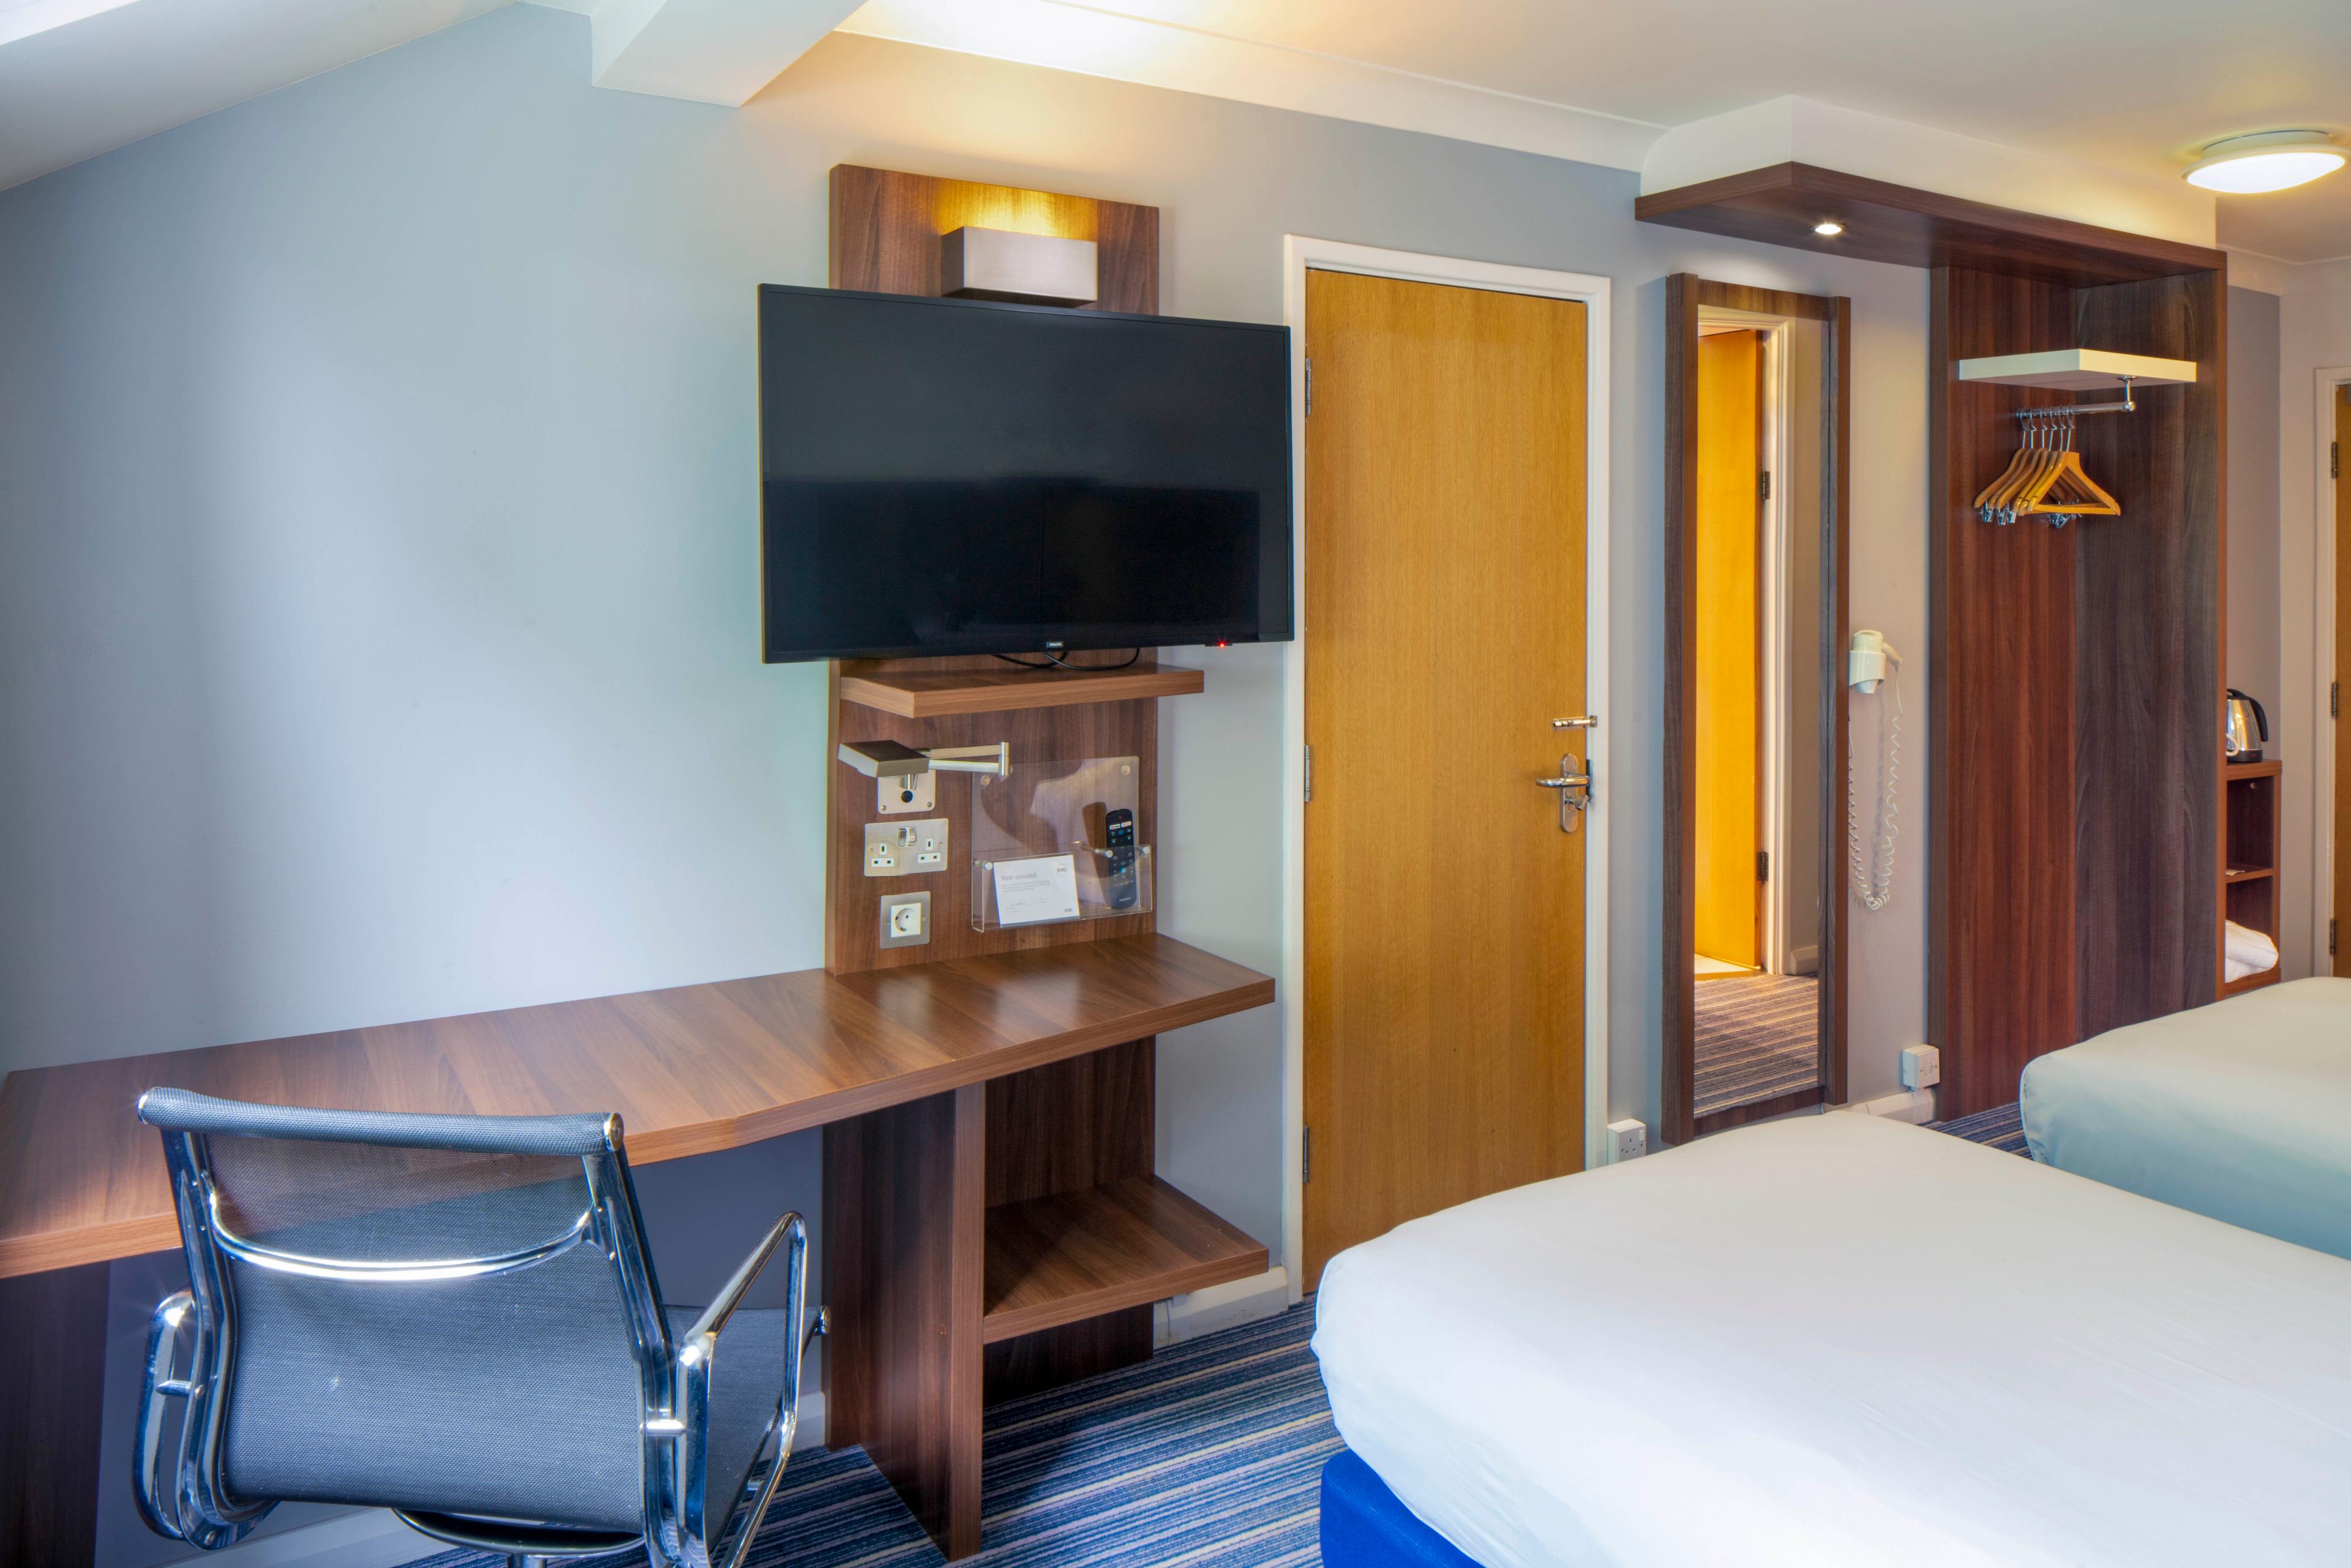 Enjoy a York getaway in our comfortable hotel